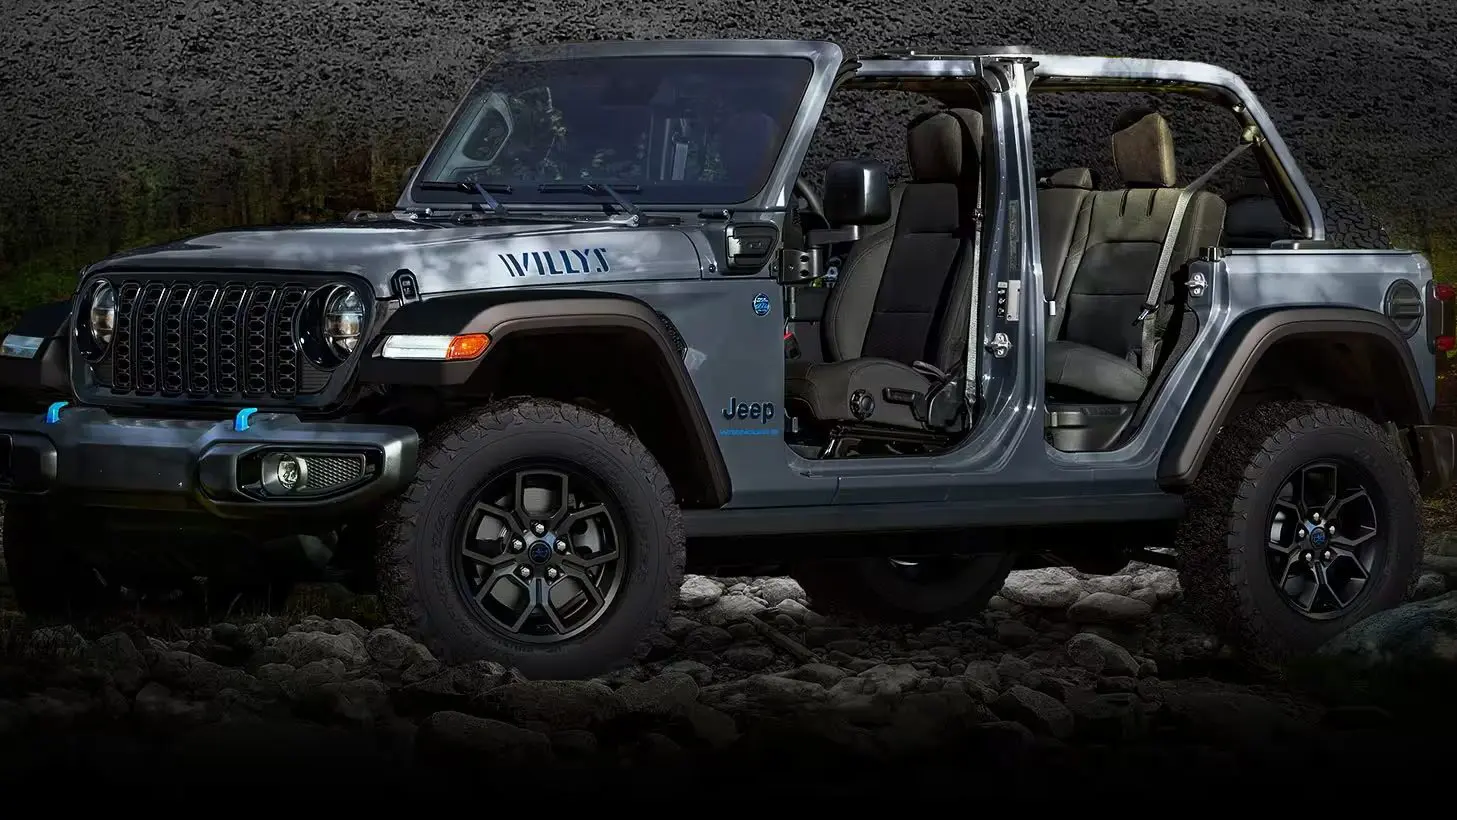 The Willys trim of the 2024 Jeep Wrangler